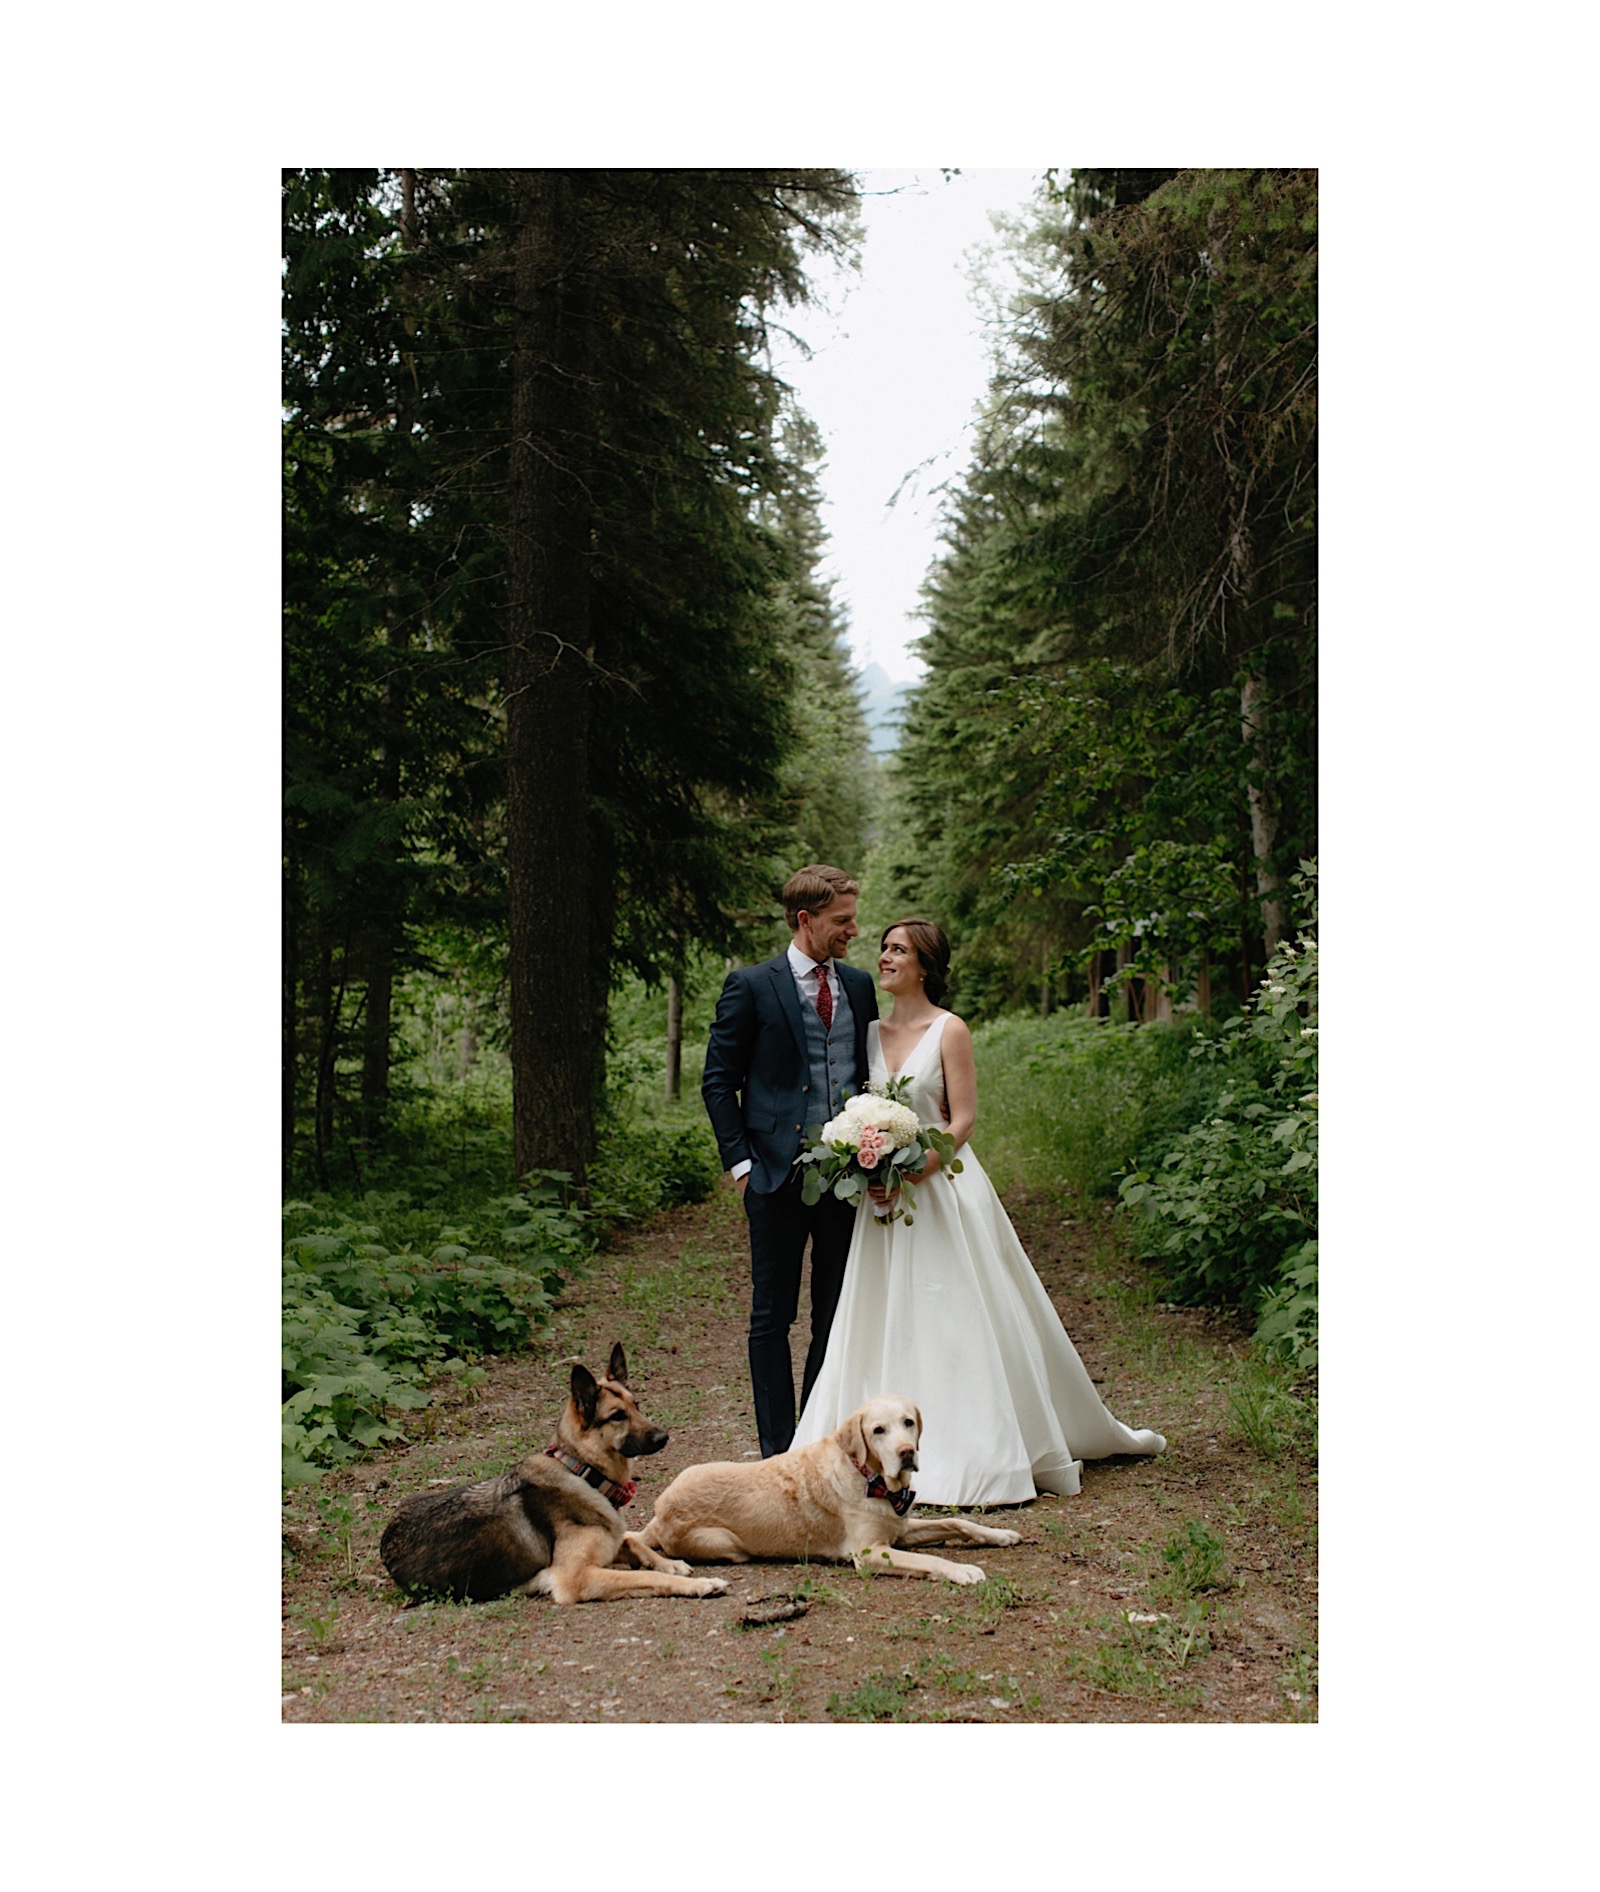 Dogs laying down politely for a formal bridal party photo